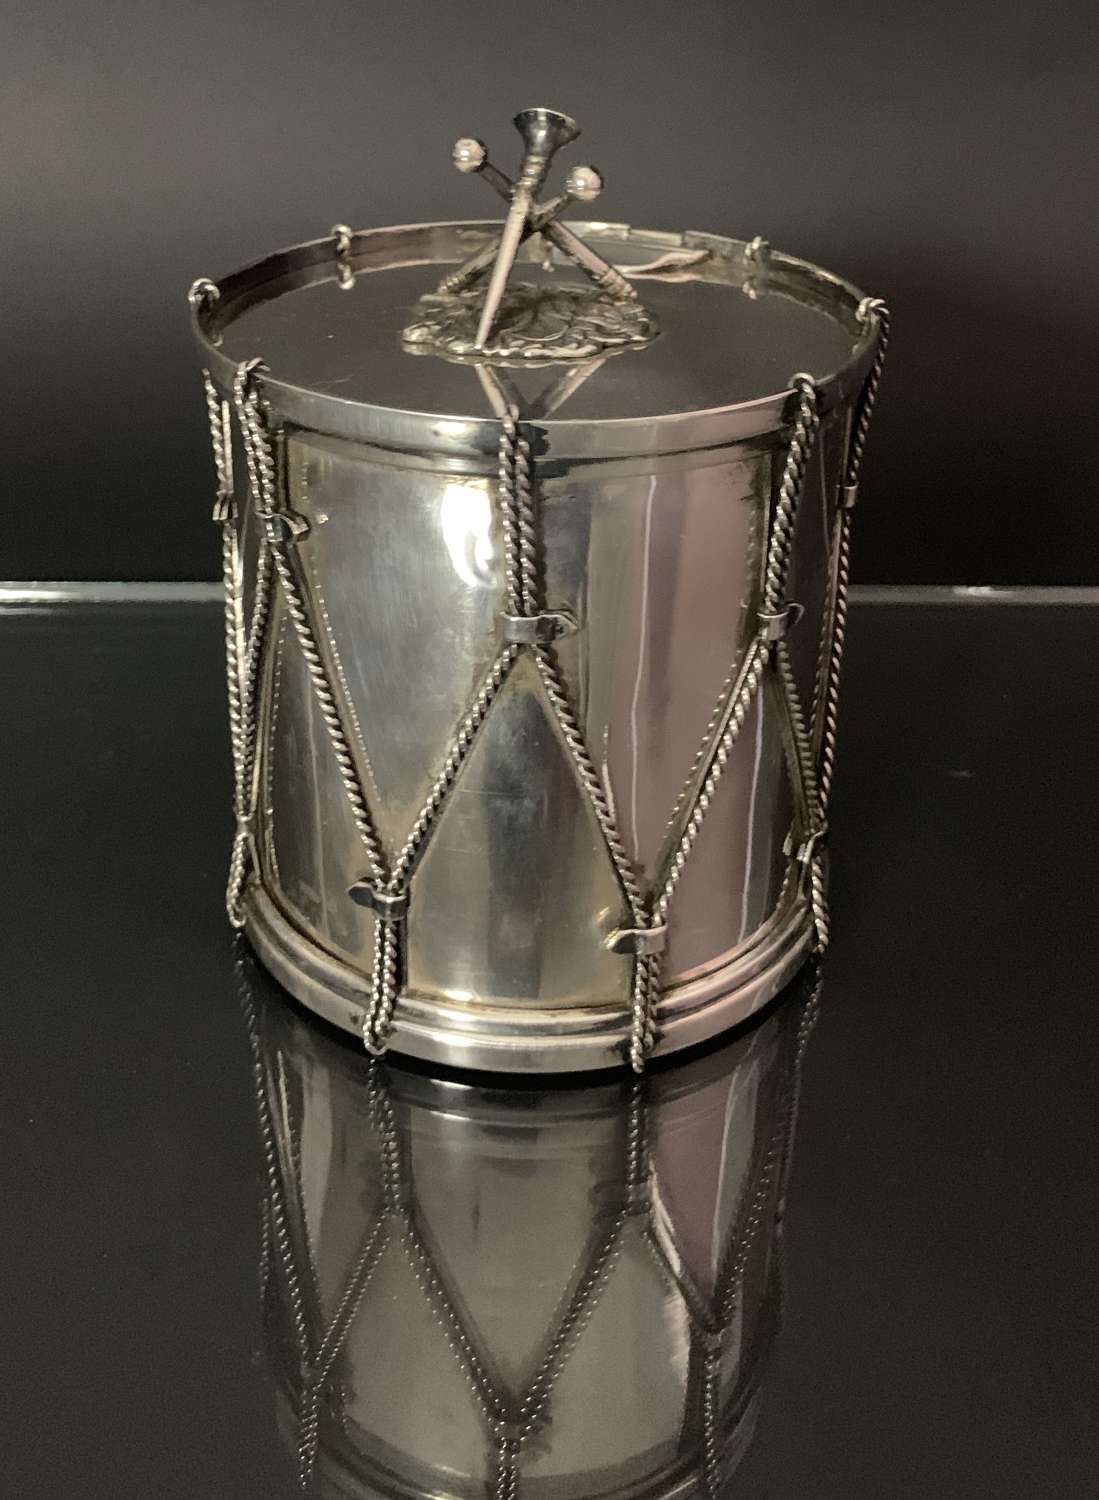 A sterling silver Military drum ice bucked by David Ferreira